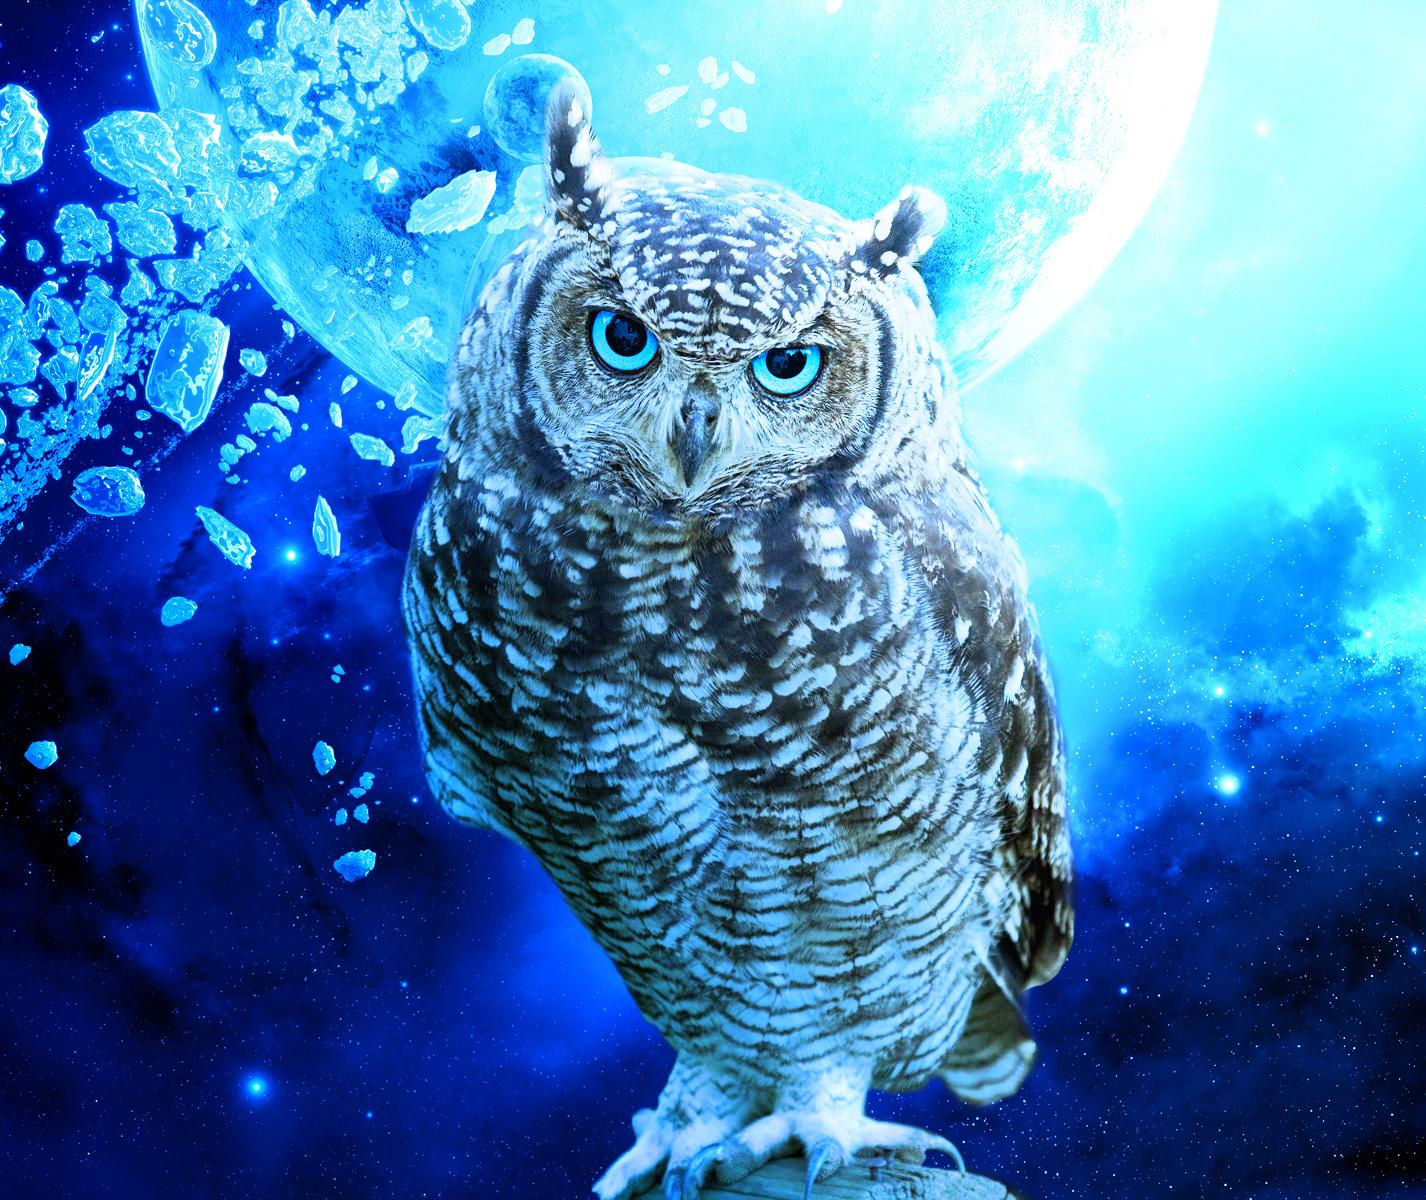 Free download Cool Owl Wallpapers Top Cool Owl Backgrounds